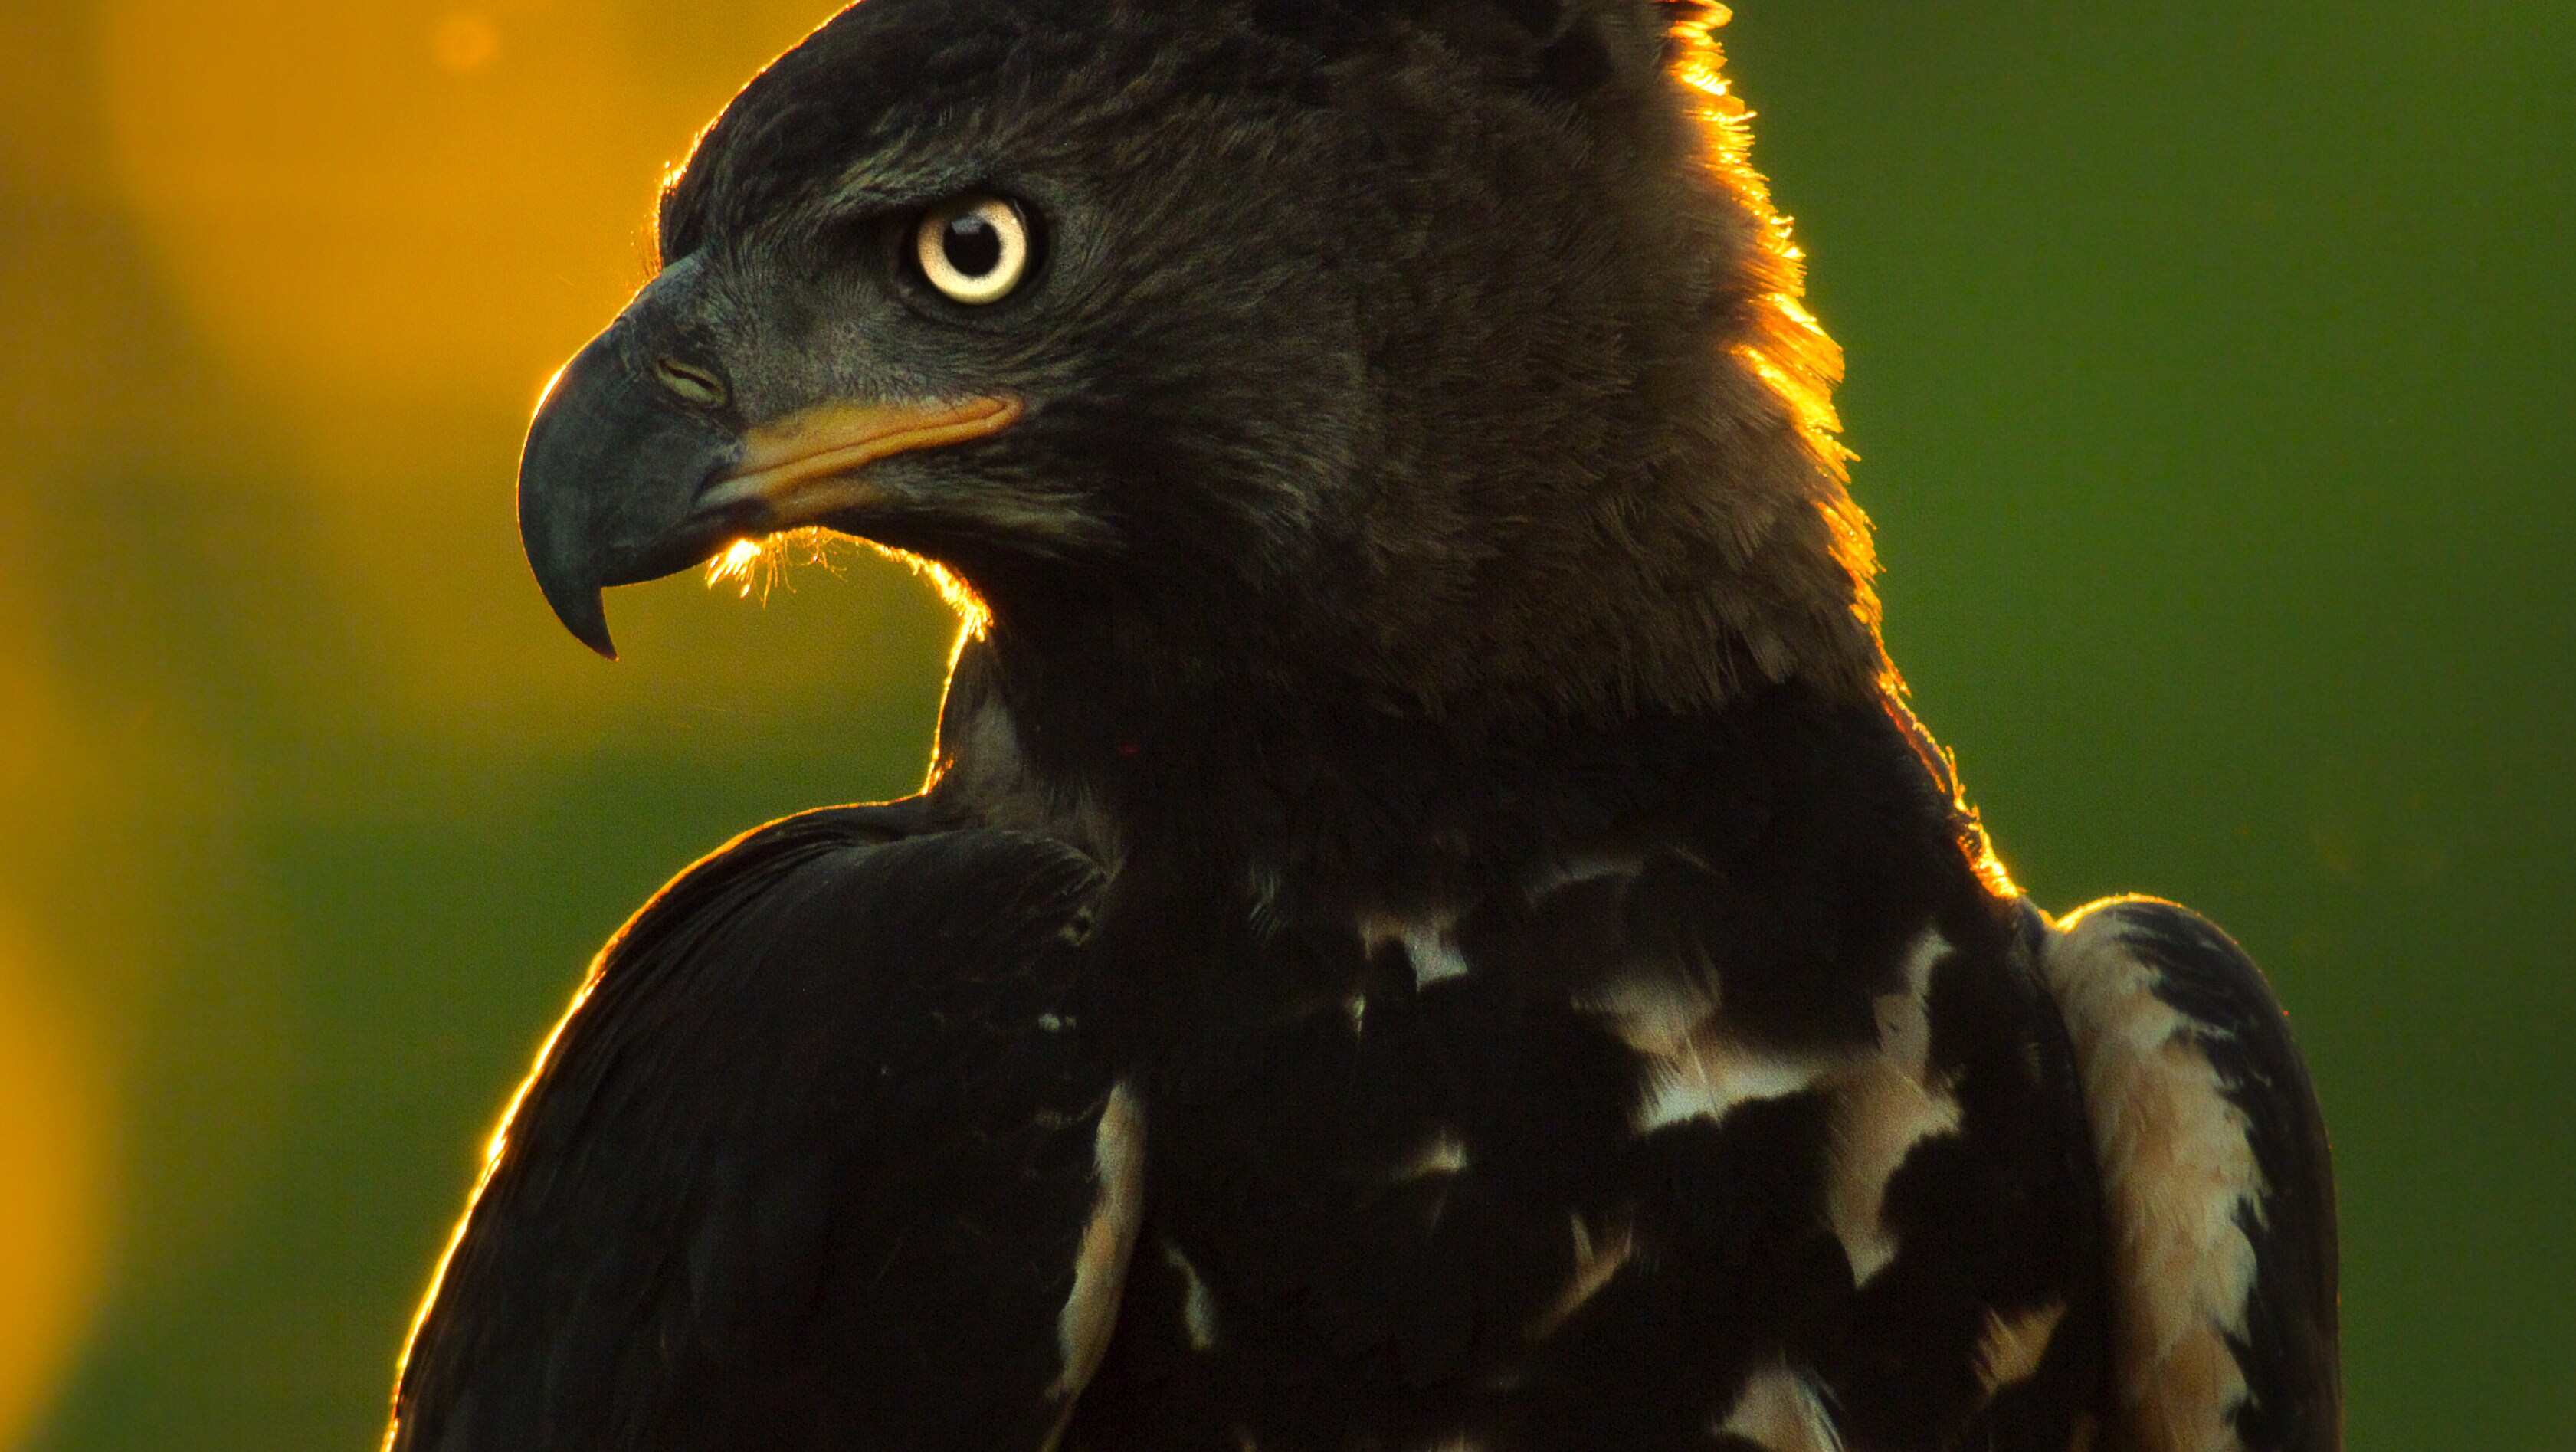 A majestic Crowned Eagle surveys the land. (Credit: National Geographic/Bertie Gregory for Disney+)